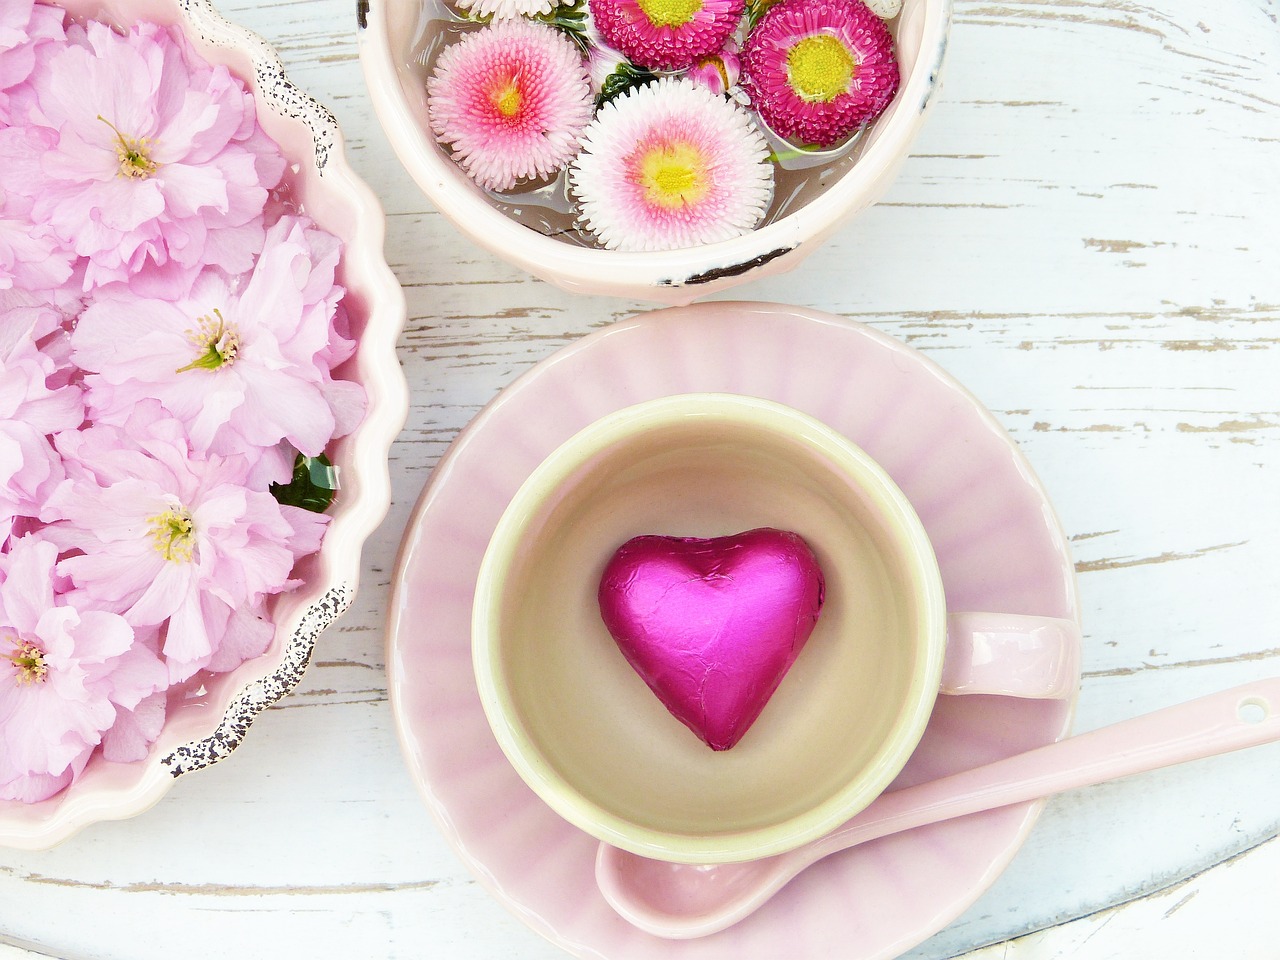 Pink flowers in bowls and a cup on a pink saucer with a pink heart in the center.